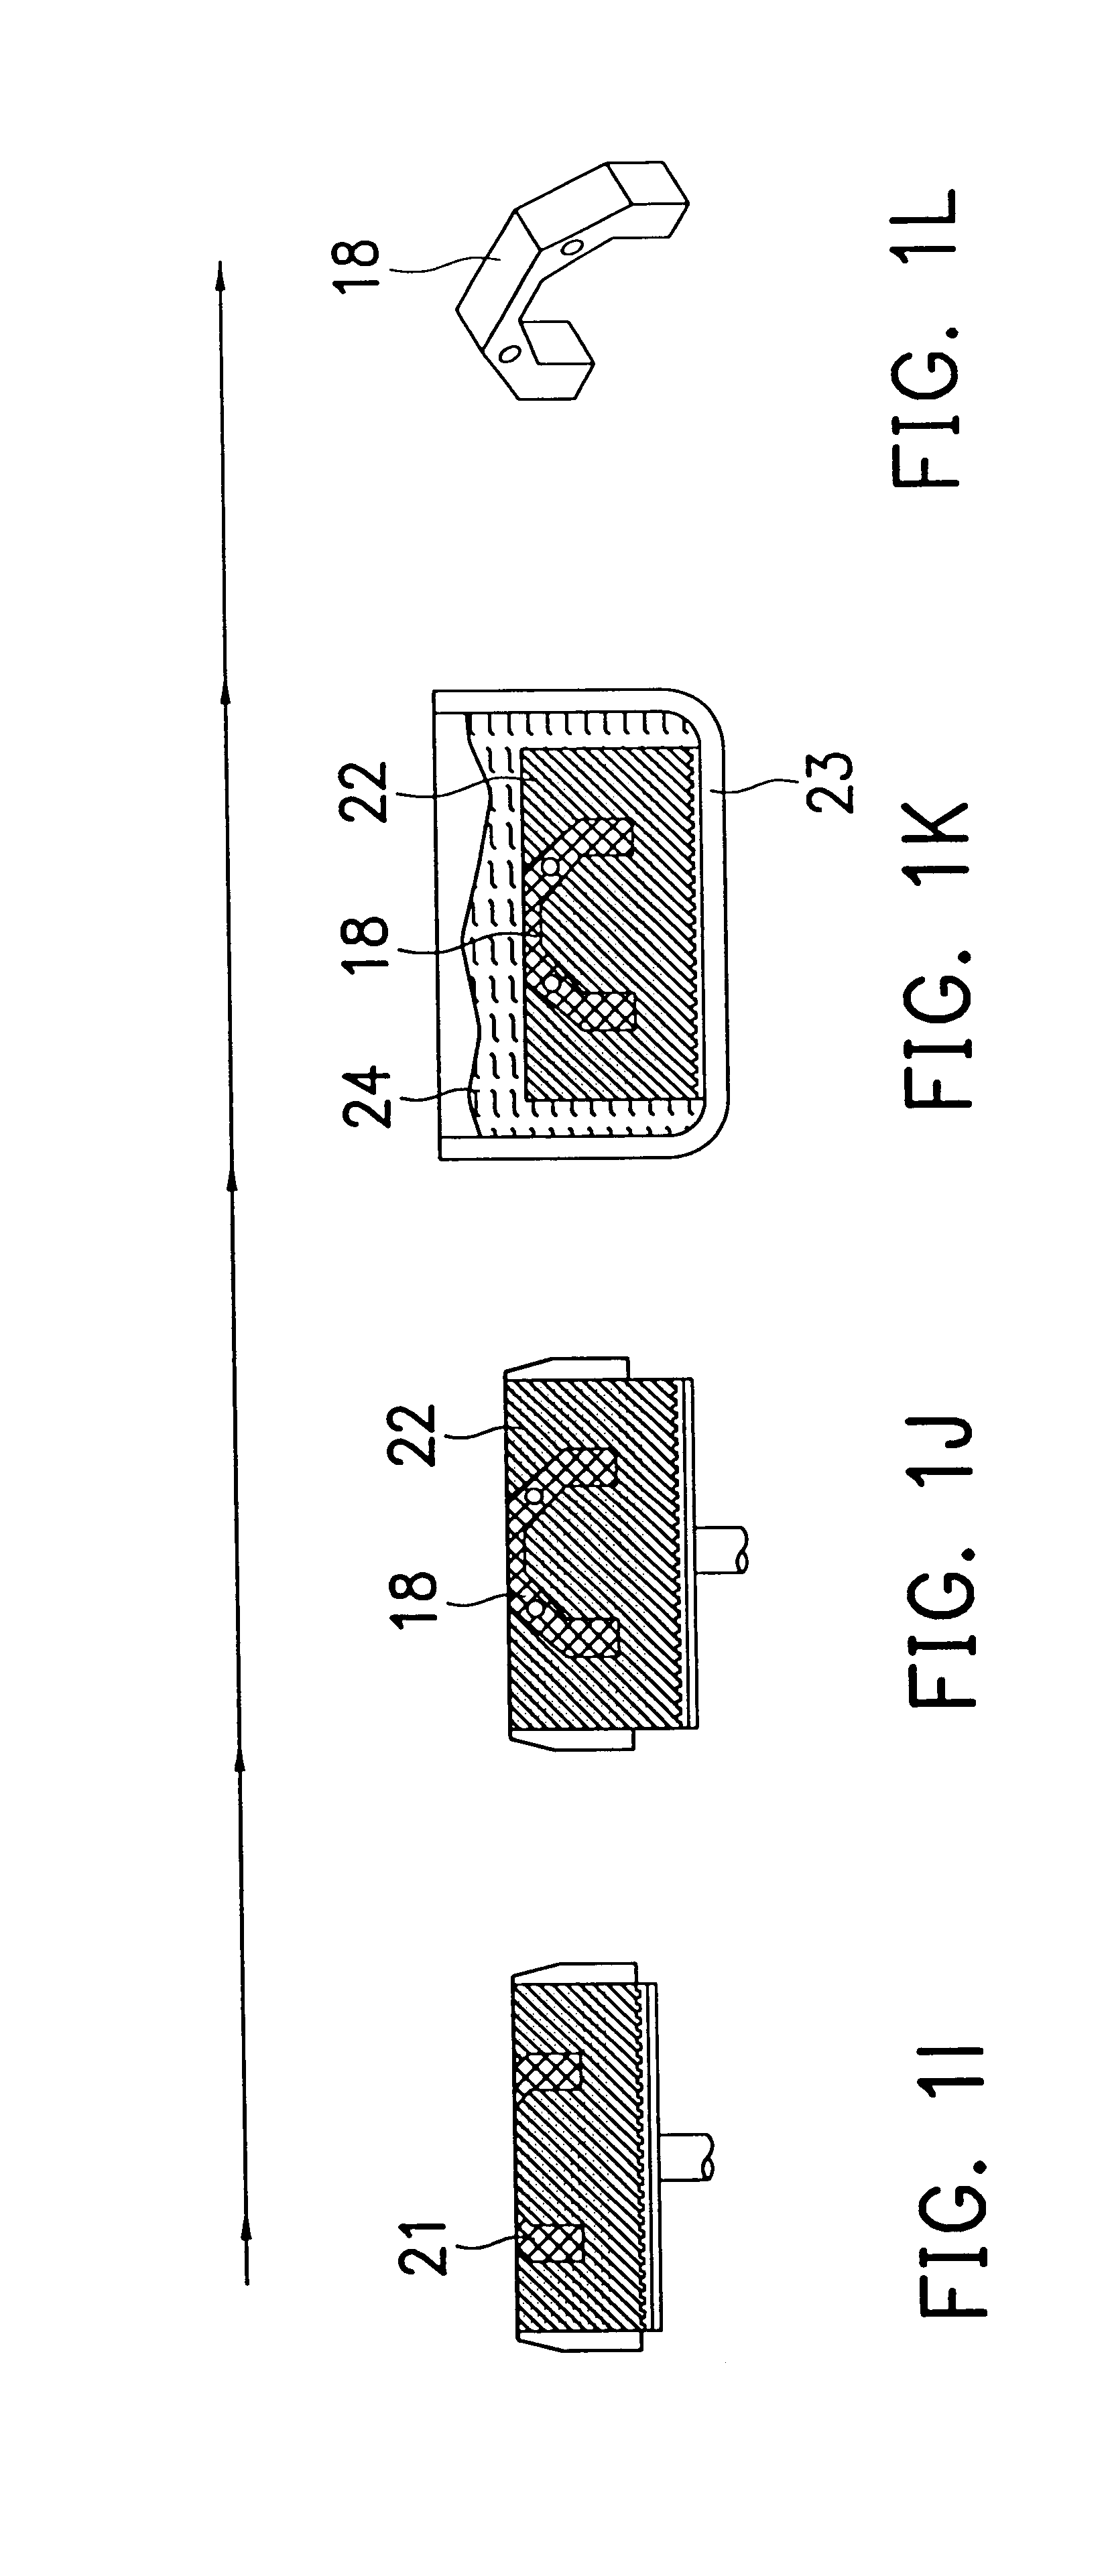 Method for rapid forming of a ceramic work piece